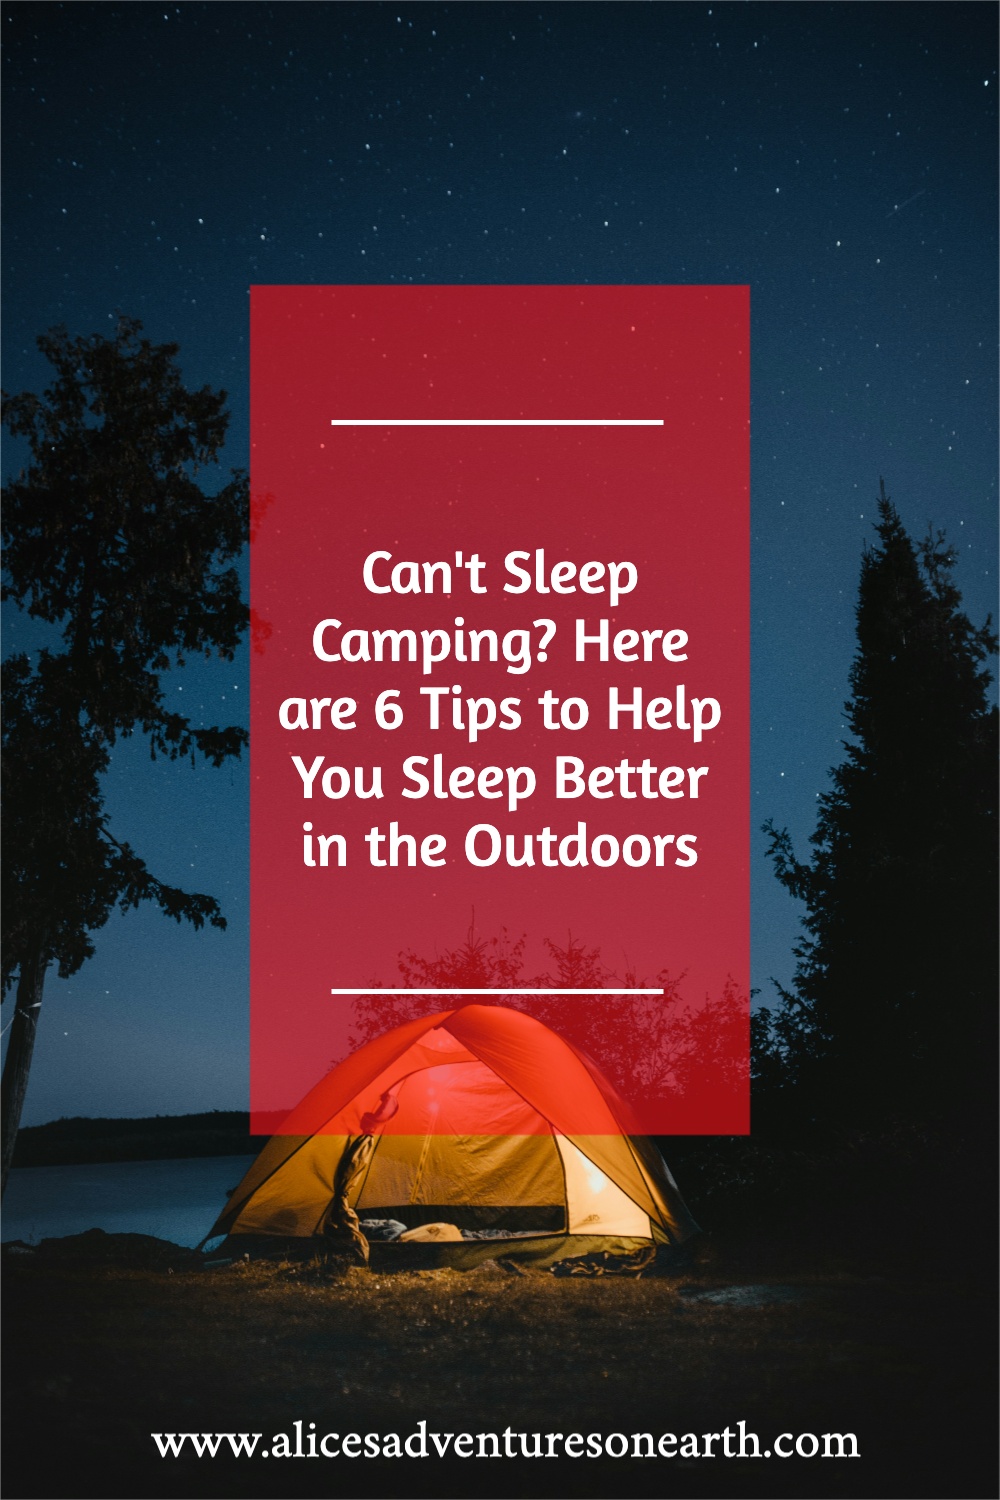 Ever wished to sleep as soundly under the star-studded sky as you do in your cozy bed? 'Here are 6 Tips to Help You Sleep Better in the Outdoors - ALICE'S ADVENTURES ON EARTH' is your ultimate guide to tranquil rests while camping. Discover effective strategies to banish restlessness and sleep soundly amidst nature's symphony. #camping